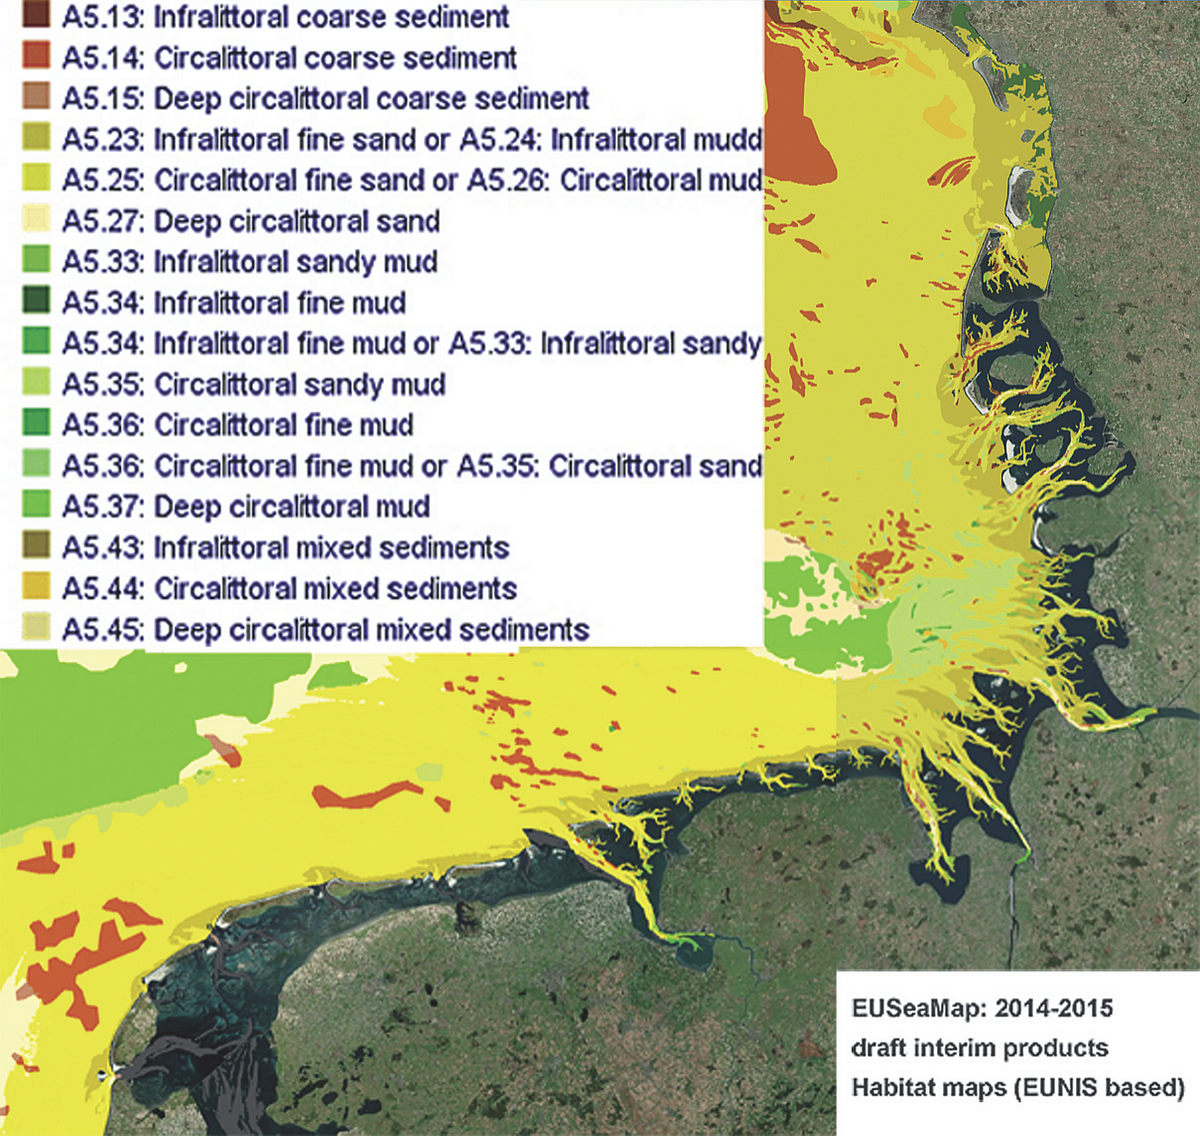 Figure 9. Habitat map of the Wadden Sea and adjacent offshore areas based on EUNIS classification (after EMODnet 2015).